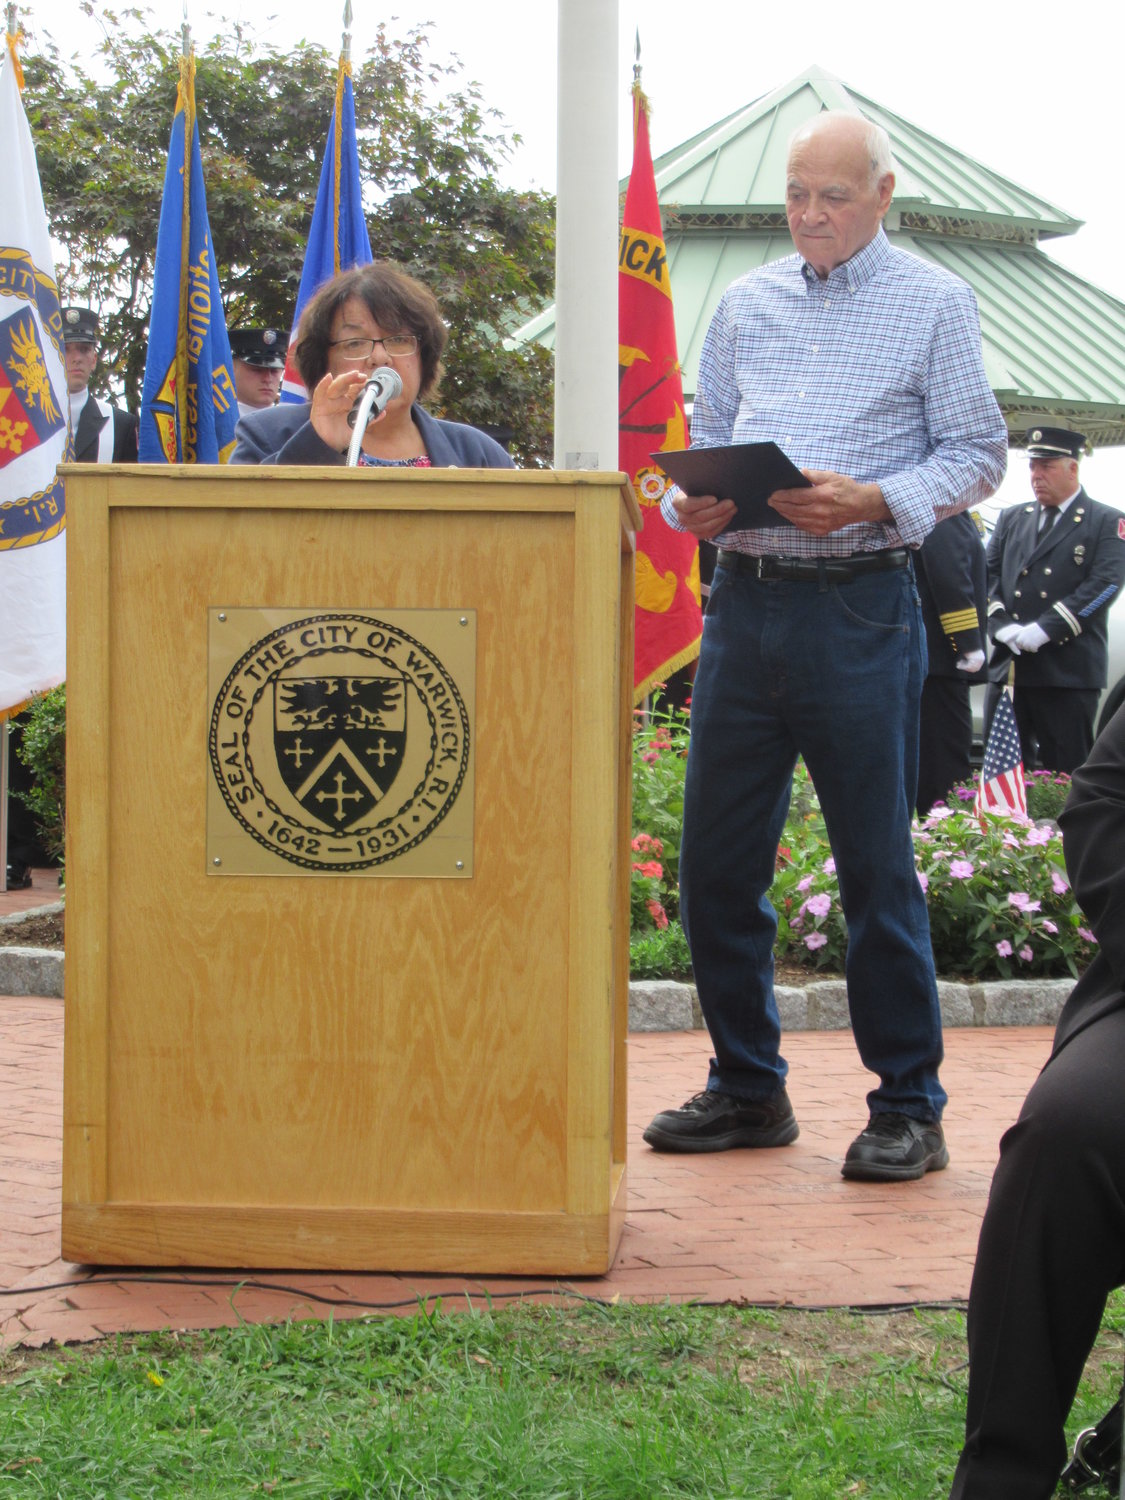 FOUNDING FATHER: Tom Isacco, who founded and maintains the 9/11 Memorial Park at Oakland Beach, was honored with a special proclamation by Warwick City Councilwoman Donna Travis during Sunday’s ceremony.